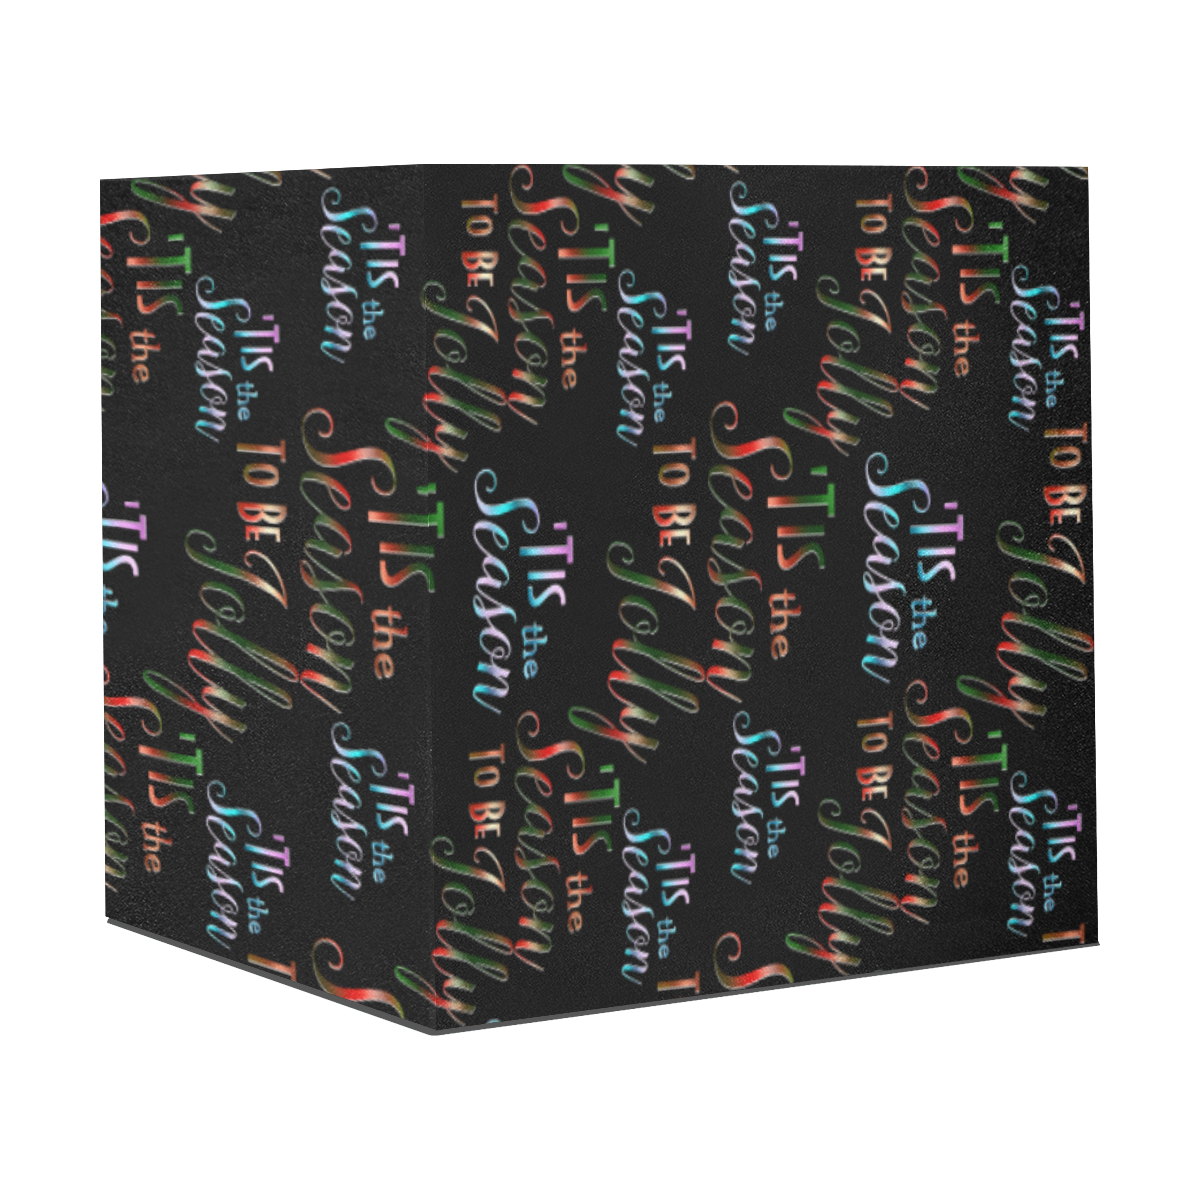 Christmas Tis The Season Pattern on Black Gift Wrapping Paper 58"x 23" (2 Rolls)